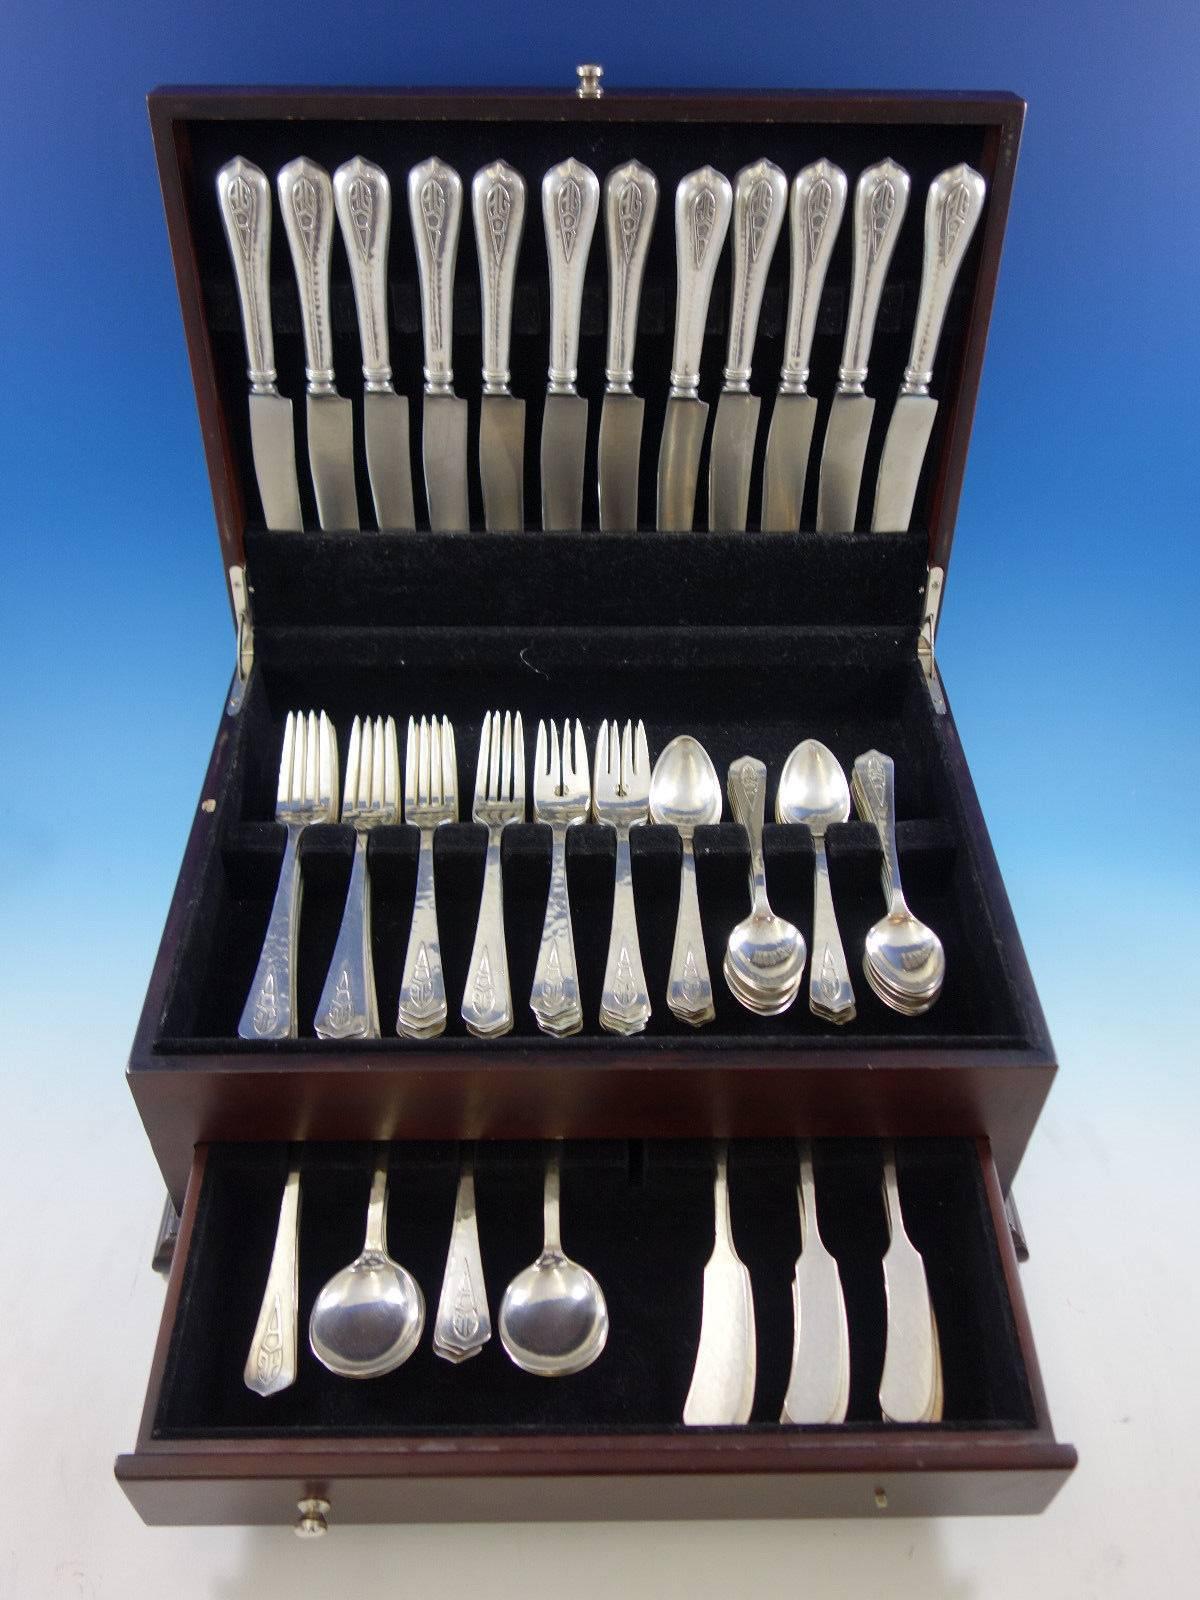 Chicago arts & crafts hand-wrought sterling silver flatware set by F. Novick of 96 pieces. This set includes: 12 dinner knives, 9 3/8